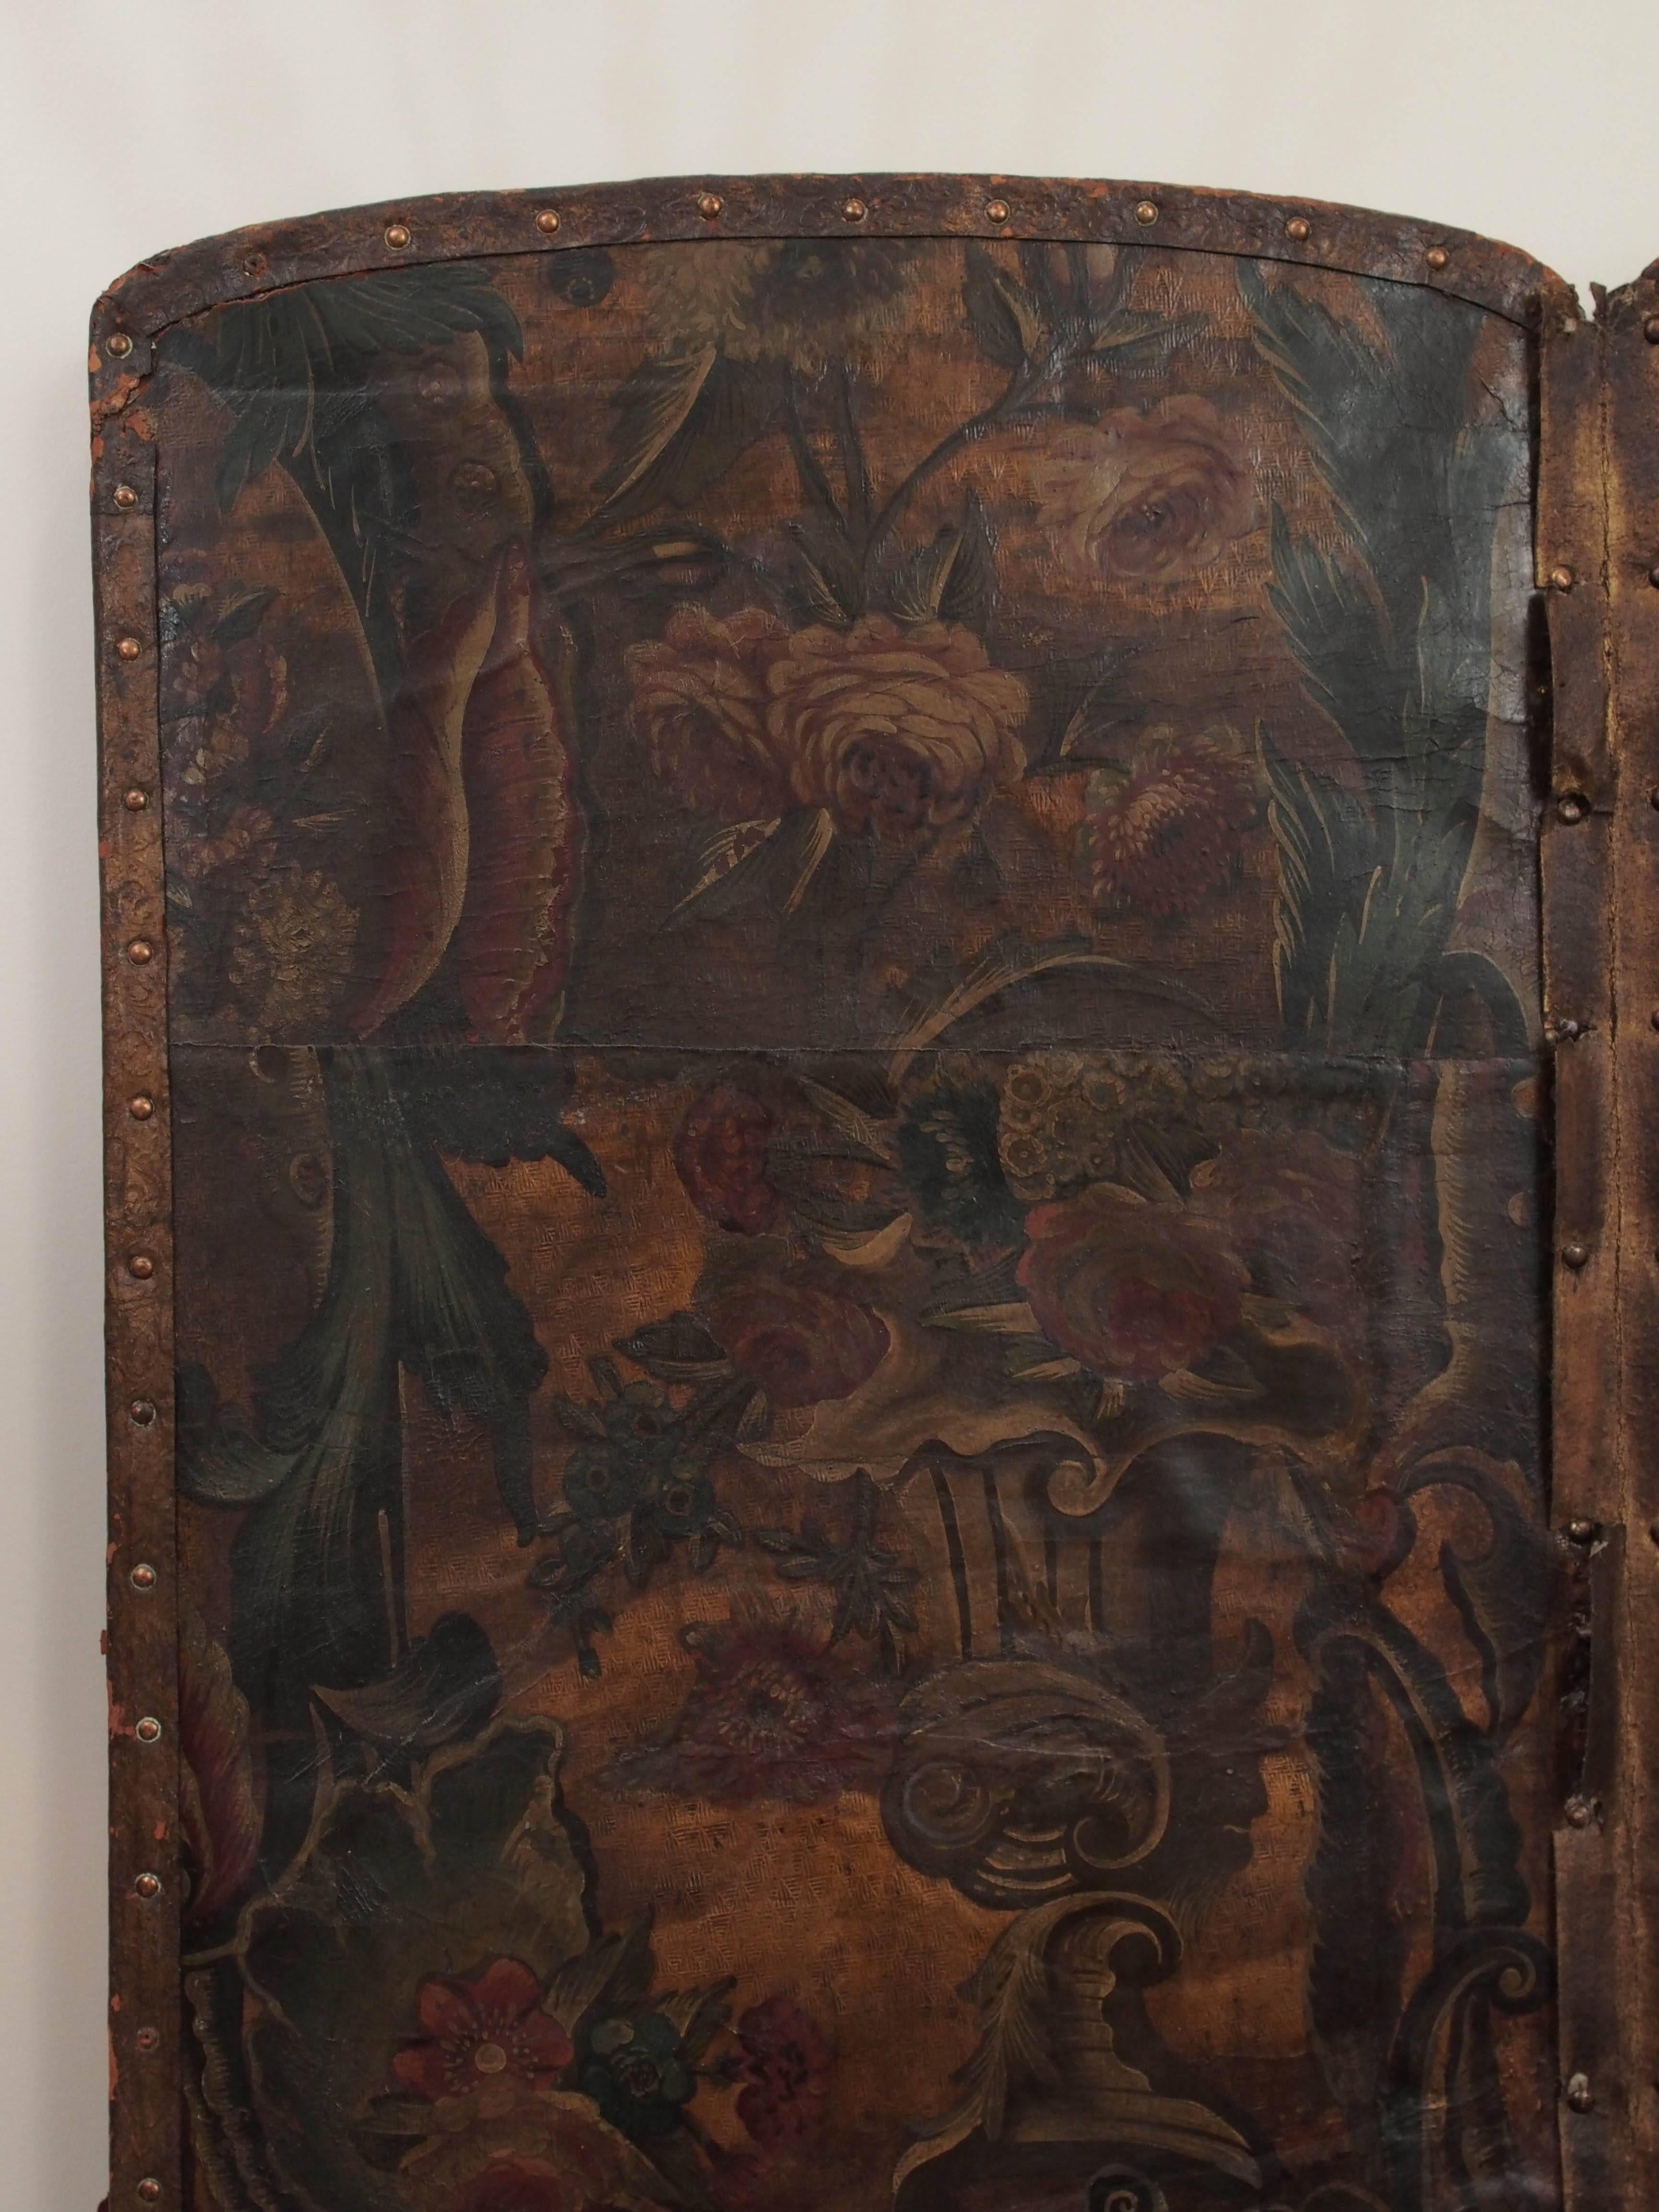 A Baroque embossed and polychrome four-panel leather screen, decorated with exotic birds, flowers, masks as fountain spouts, and a really cute squirrel. Panels are presented on a 20th century blackwood frame. 

European embossed and painted